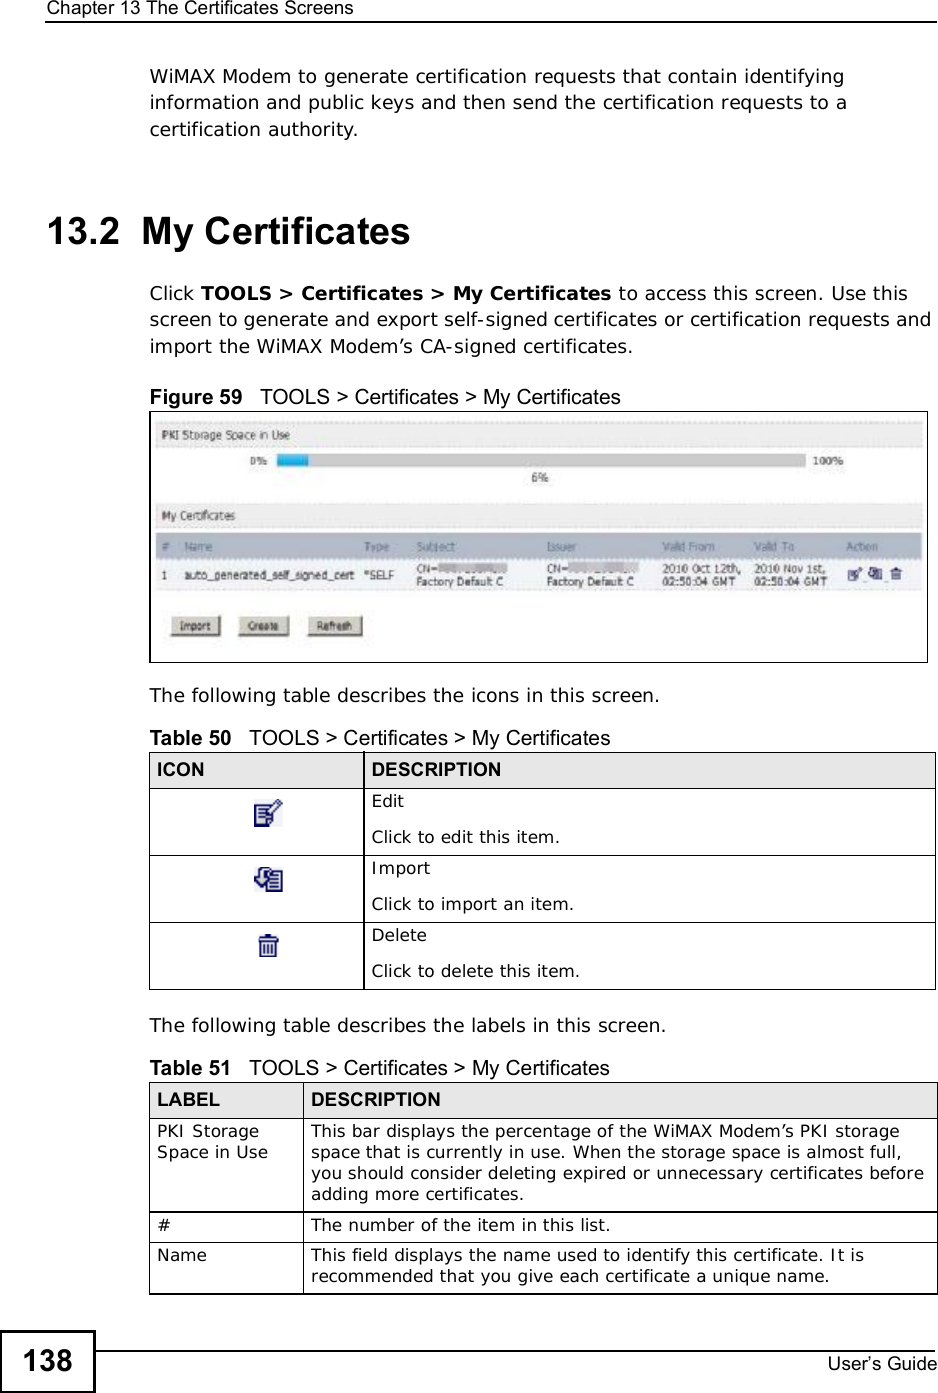 Chapter 13The Certificates ScreensUser s Guide138WiMAX Modem to generate certification requests that contain identifying information and public keys and then send the certification requests to a certification authority. 13.2  My CertificatesClick TOOLS &gt; Certificates &gt; My Certificates to access this screen. Use this screen to generate and export self-signed certificates or certification requests and import the WiMAX Modem’s CA-signed certificates.Figure 59   TOOLS &gt; Certificates &gt; My Certificates      The following table describes the icons in this screen.The following table describes the labels in this screen. Table 50   TOOLS &gt; Certificates &gt; My CertificatesICON DESCRIPTIONEditClick to edit this item.ImportClick to import an item.DeleteClick to delete this item.Table 51   TOOLS &gt; Certificates &gt; My CertificatesLABEL DESCRIPTIONPKI Storage Space in Use This bar displays the percentage of the WiMAX Modem’s PKI storage space that is currently in use. When the storage space is almost full, you should consider deleting expired or unnecessary certificates before adding more certificates.#The number of the item in this list.NameThis field displays the name used to identify this certificate. It is recommended that you give each certificate a unique name. 